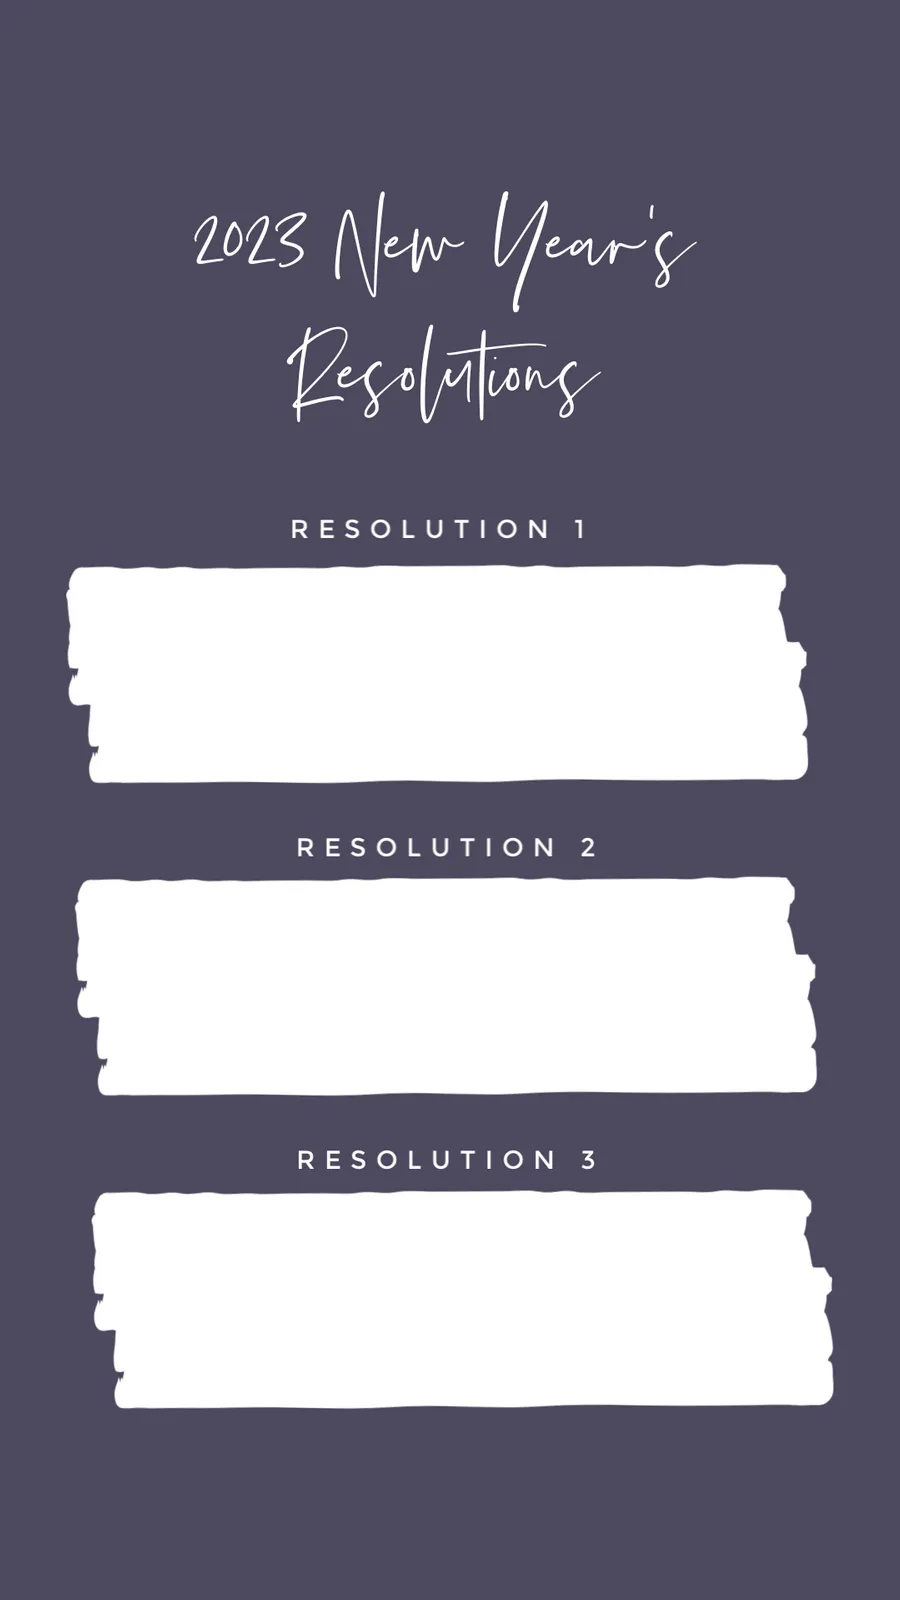 Three New Year's Resolutions facebook-story template